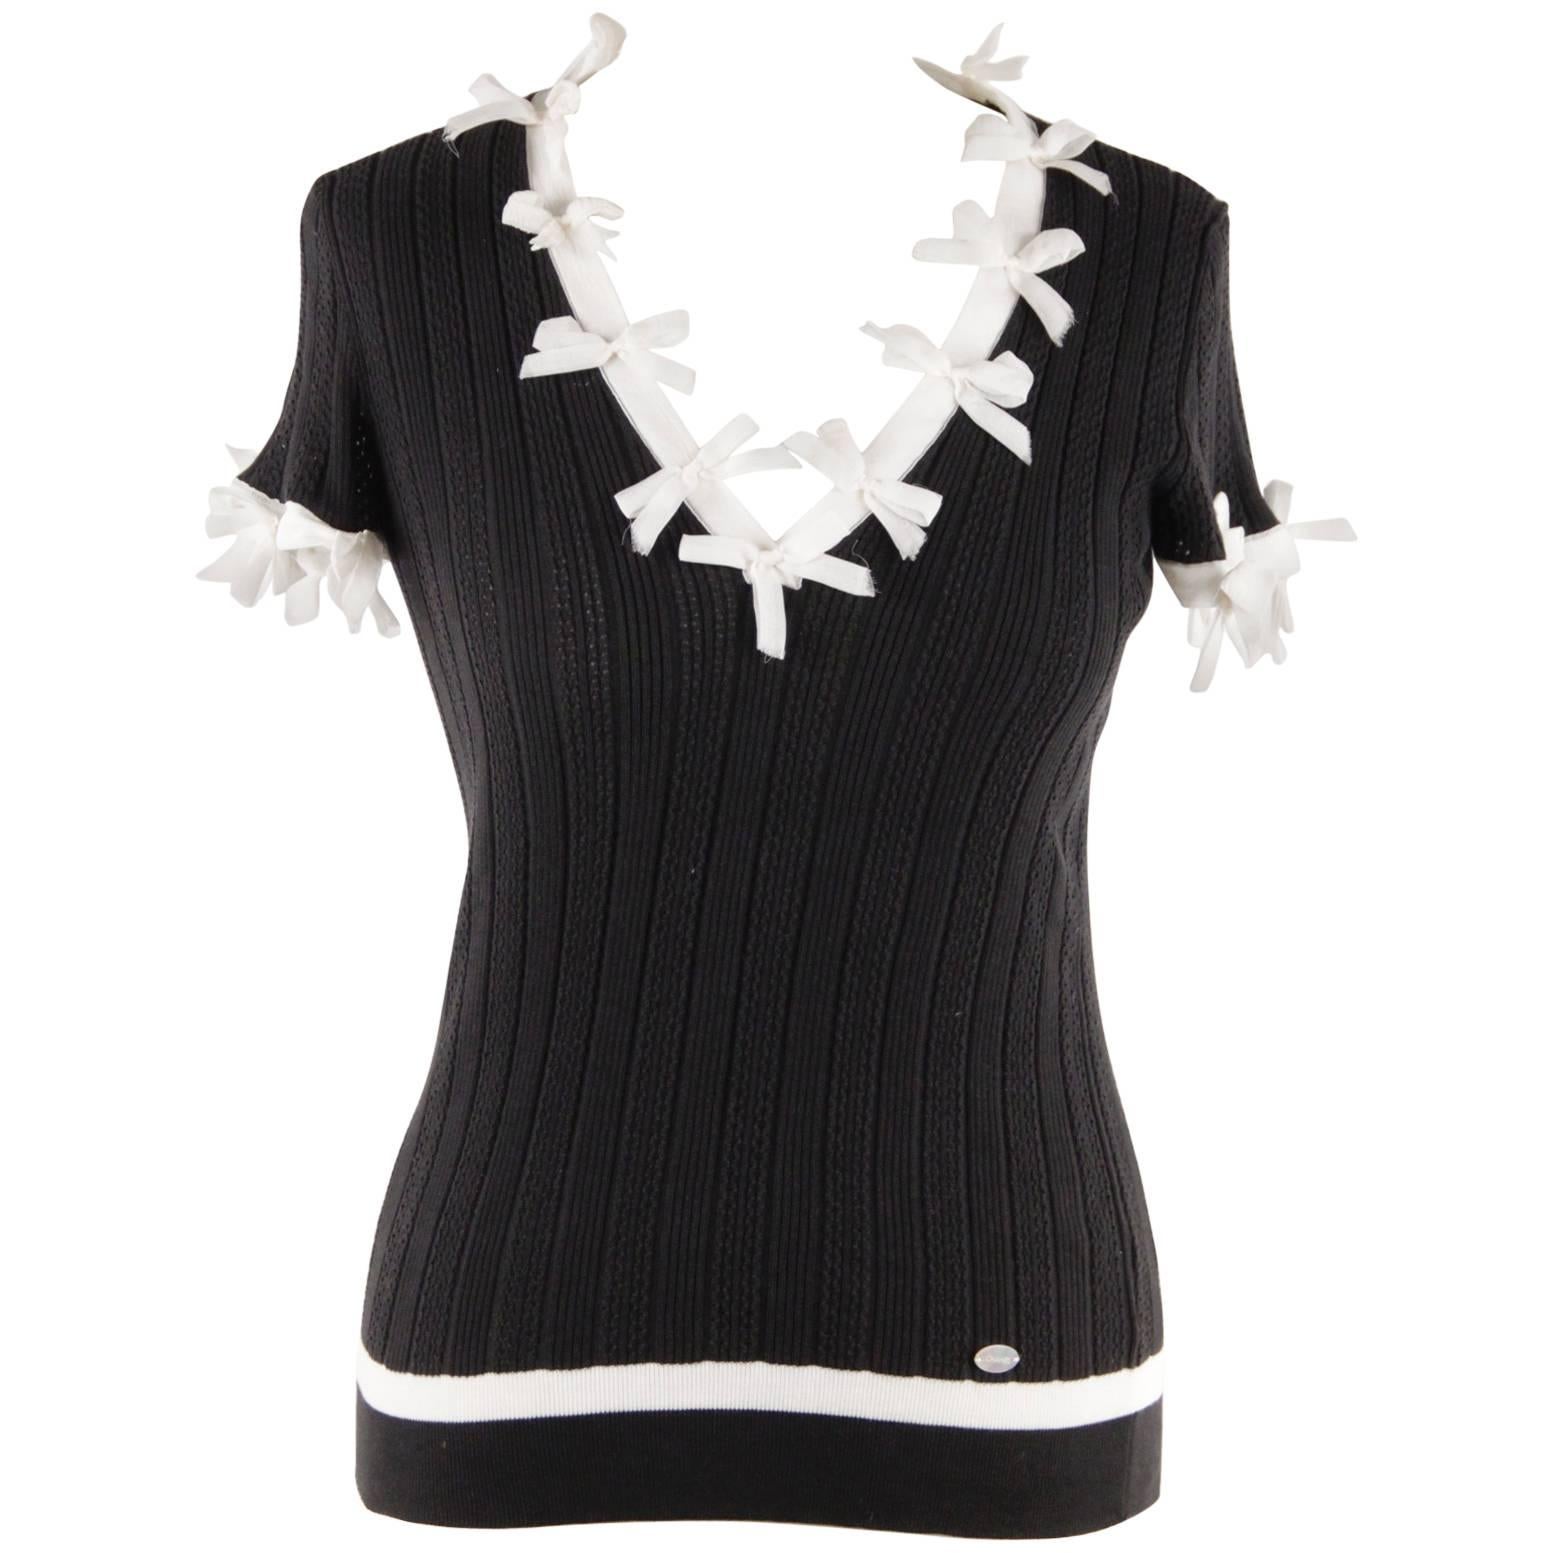 CHANEL Black Cotton KNIT TOP Short Sleeve with BOWS Detailing SIZE 38